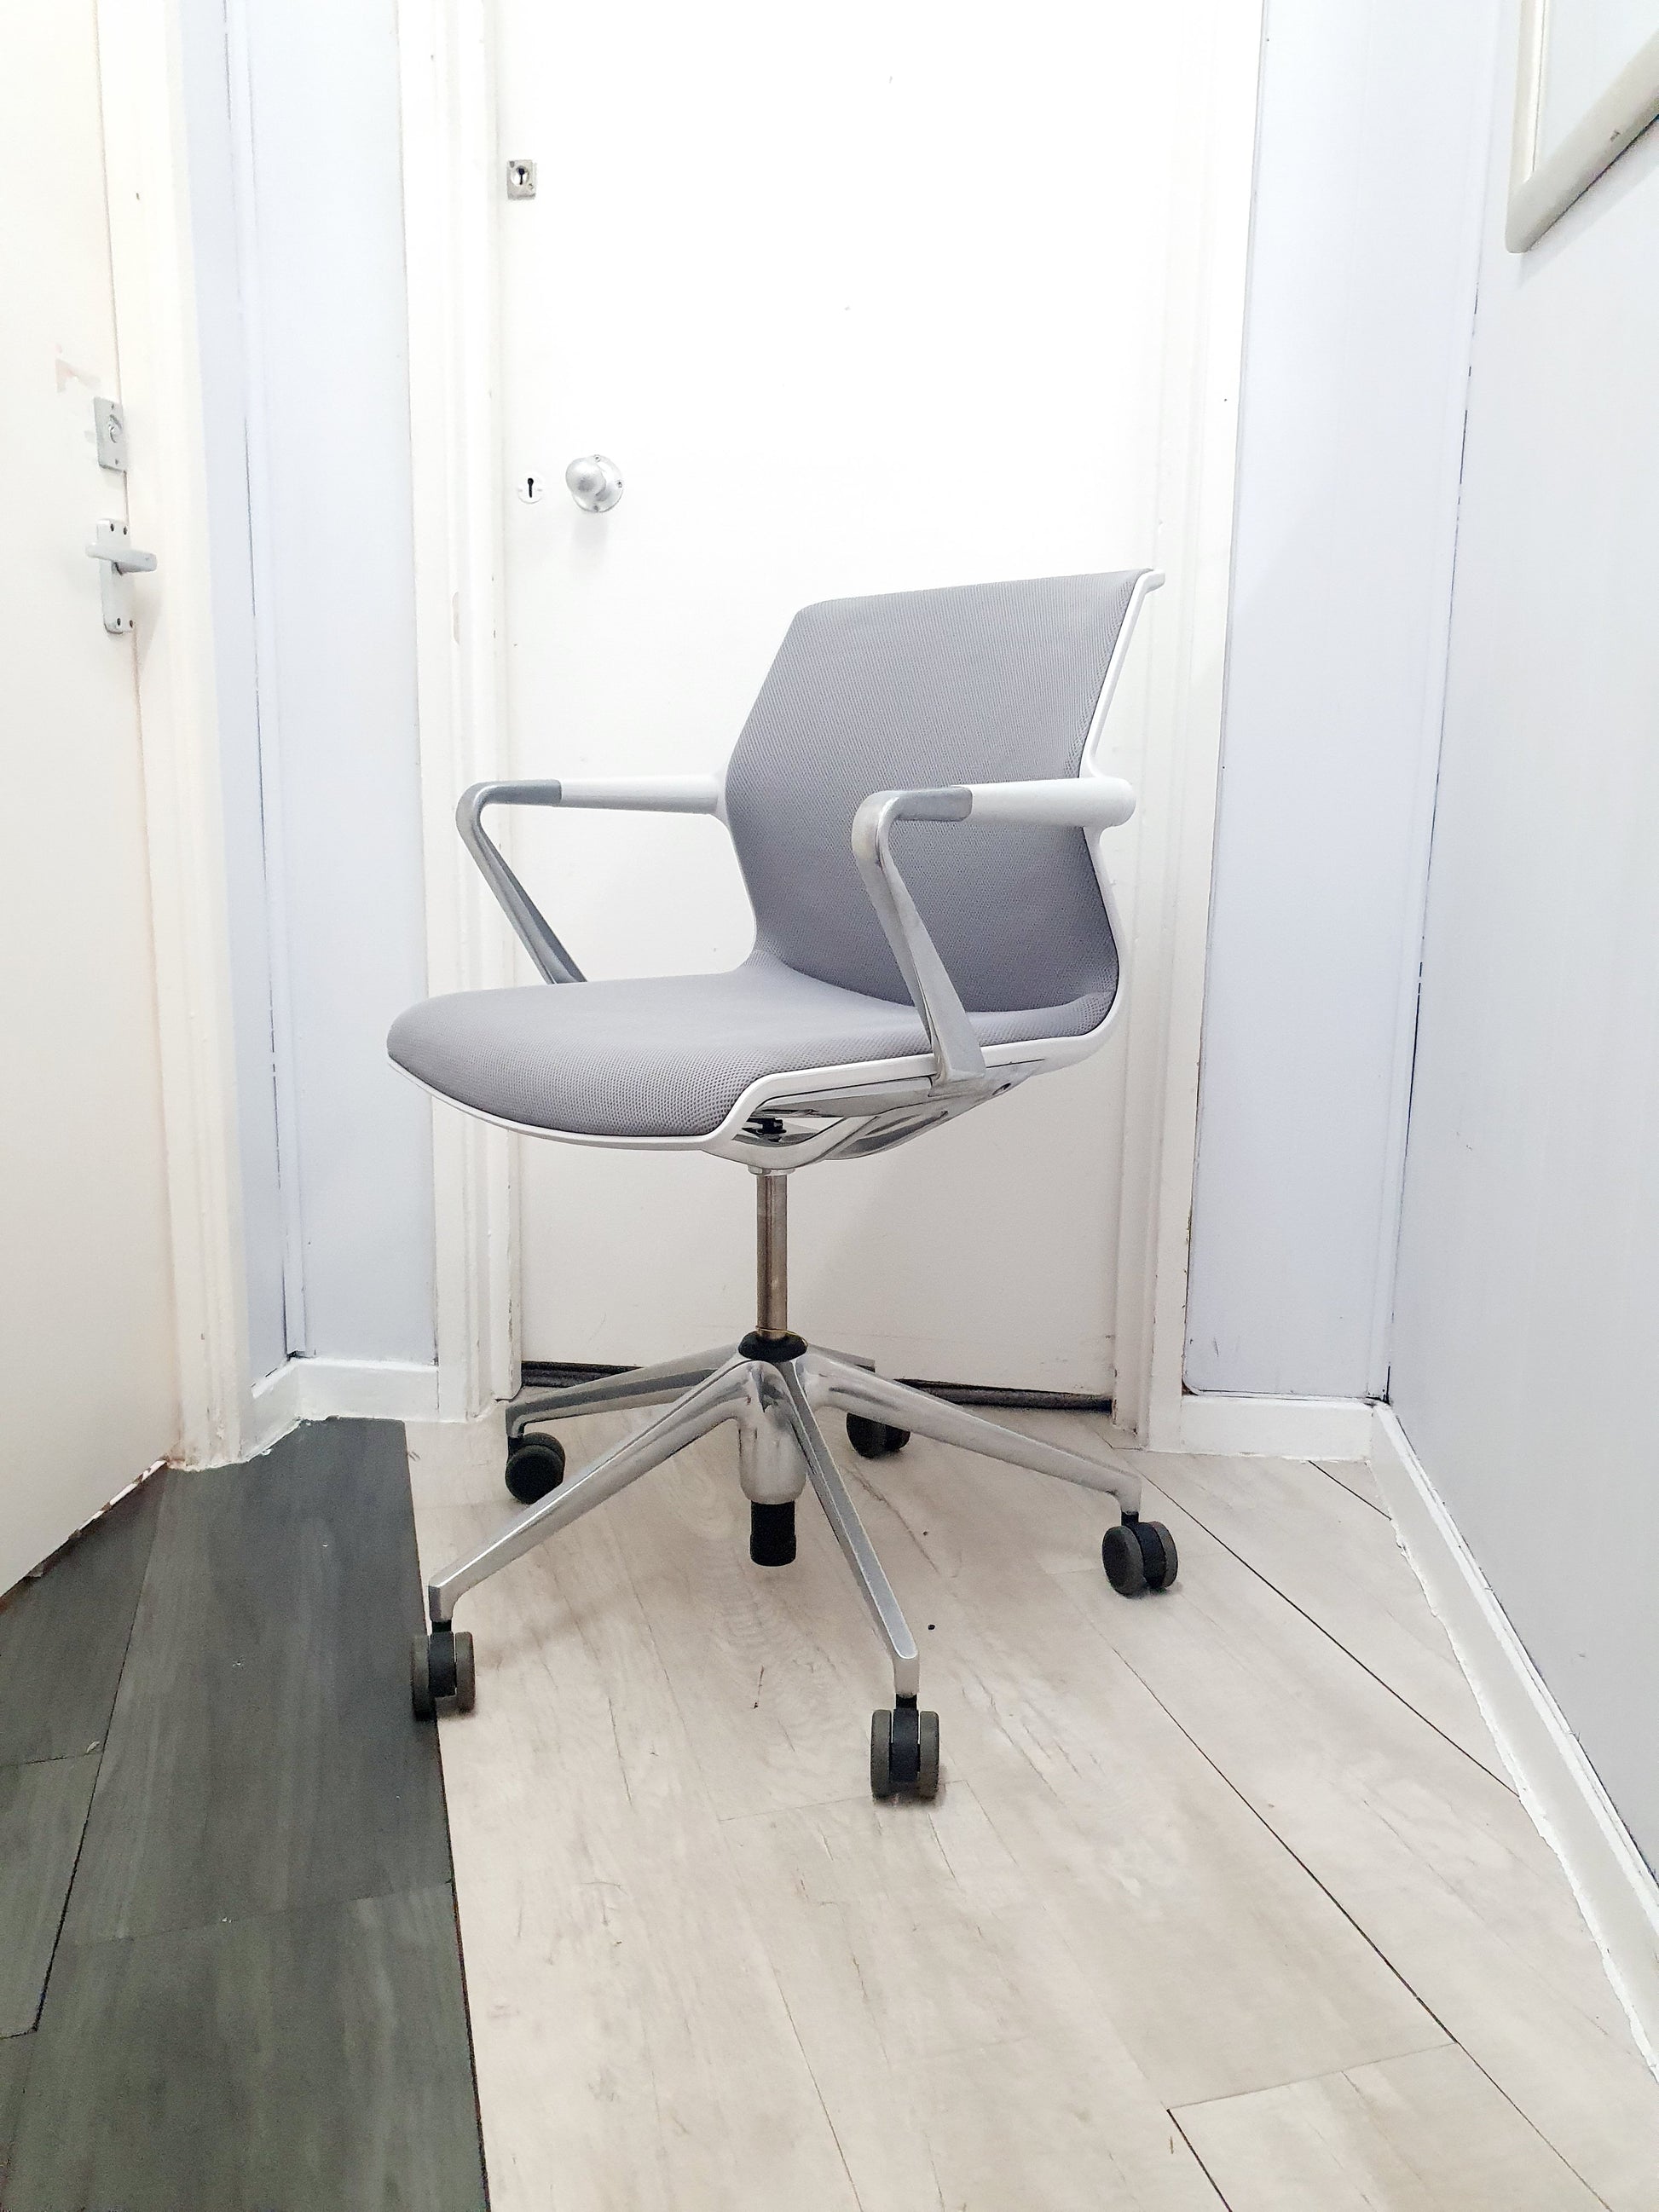 Executive office meeting chair in grey and white